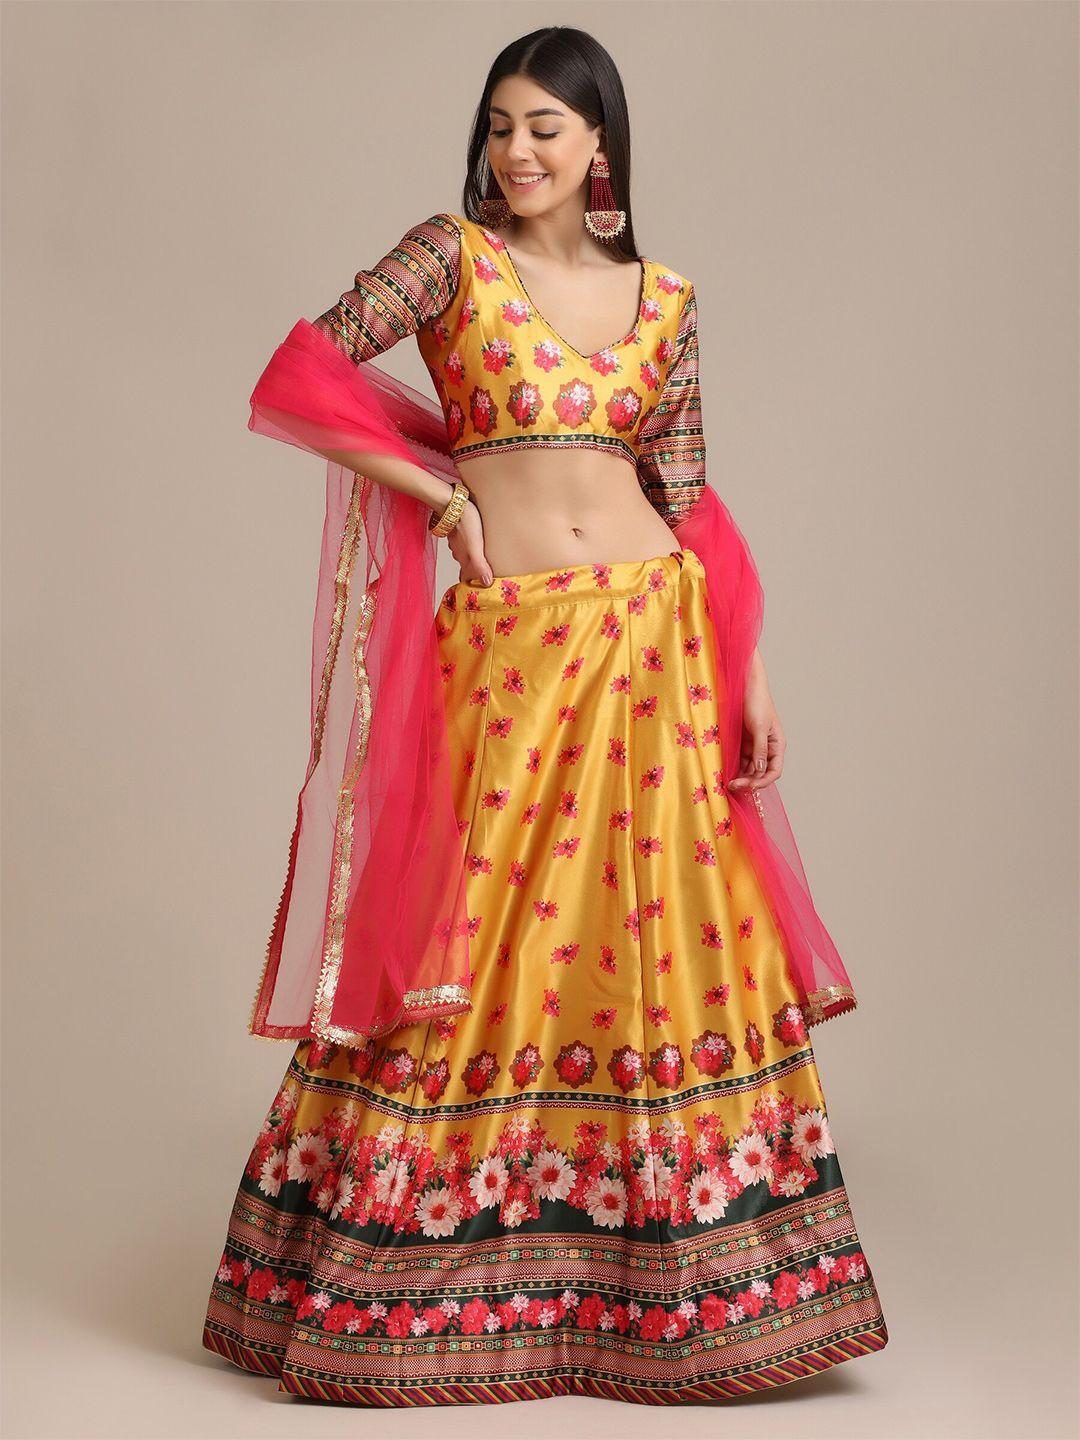 warthy ent yellow & pink printed semi-stitched lehenga & unstitched blouse with dupatta